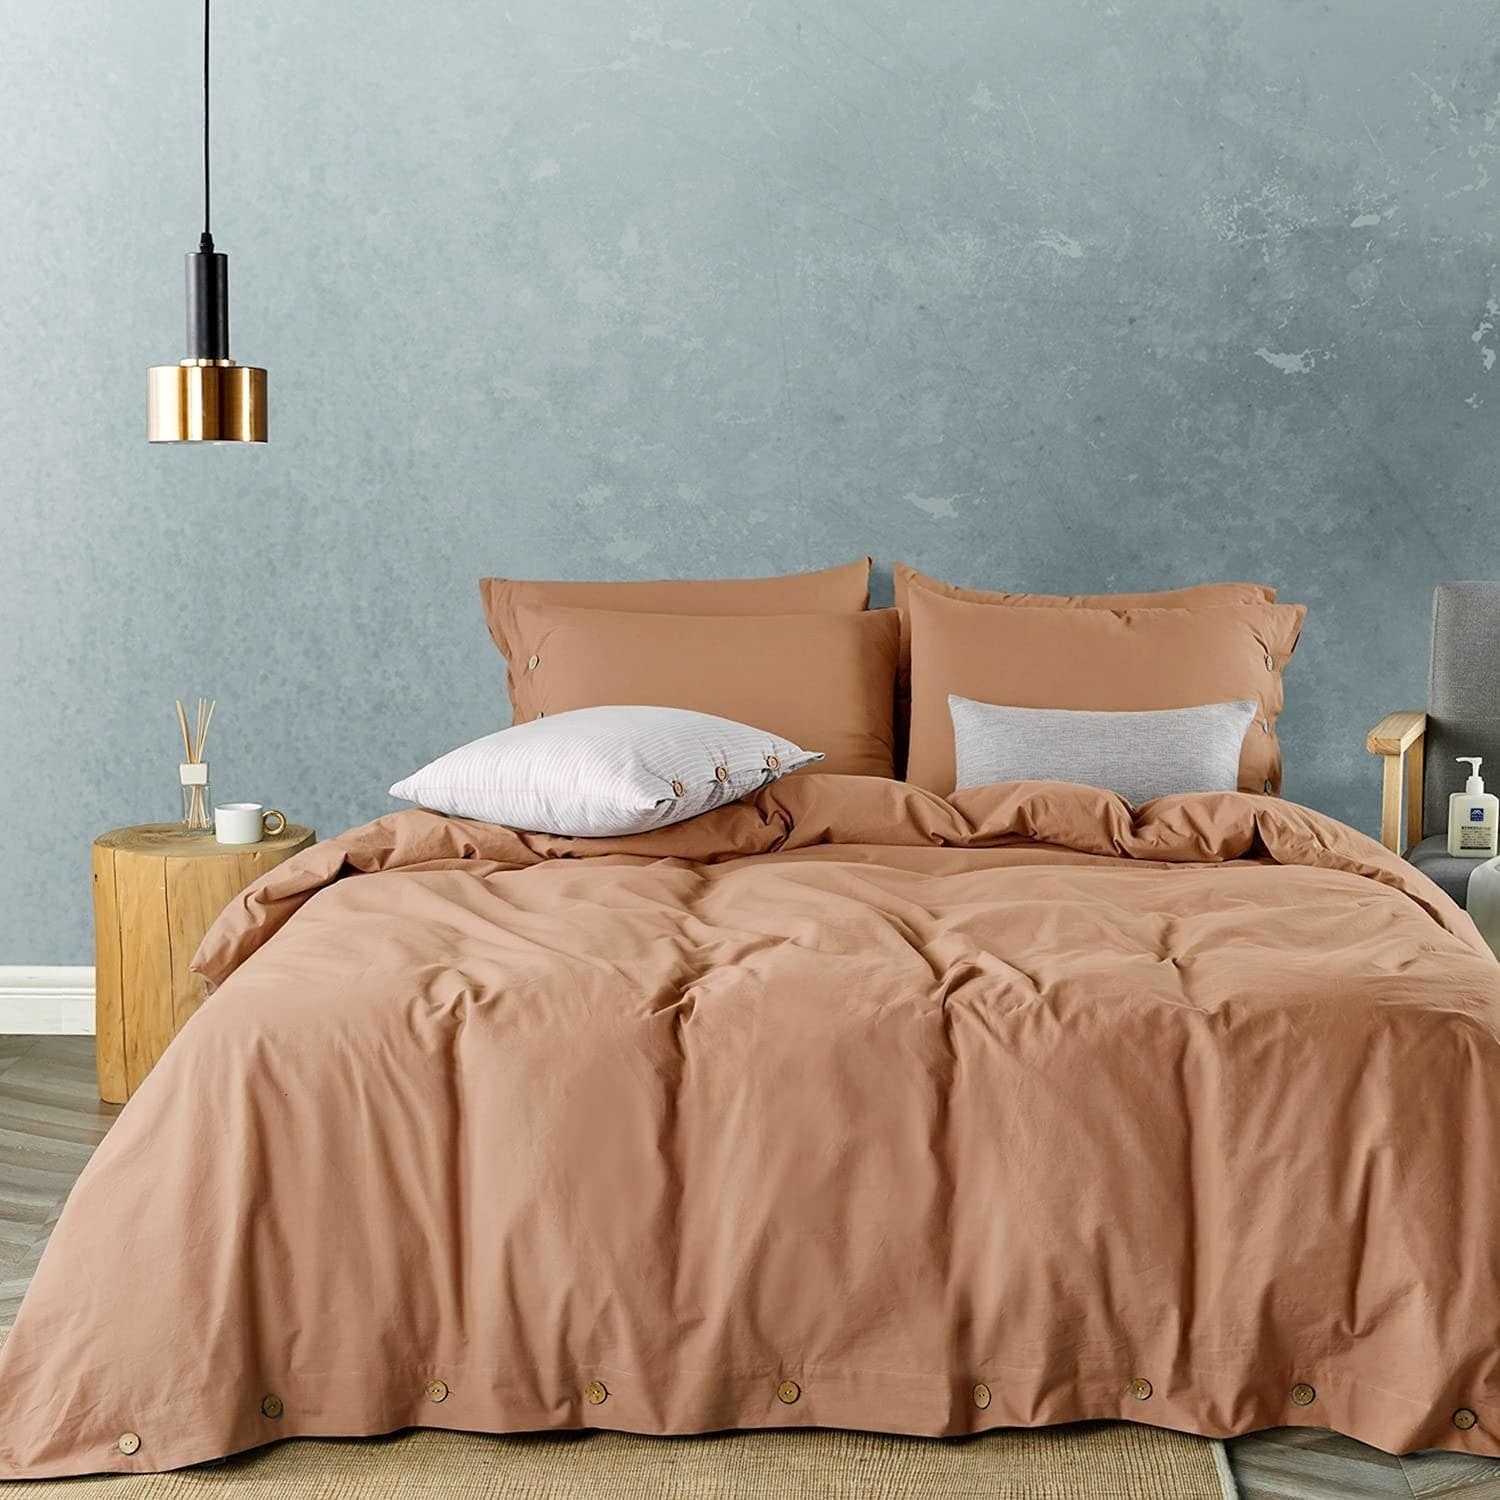 a bed with a comfy duvet on it and several pillows